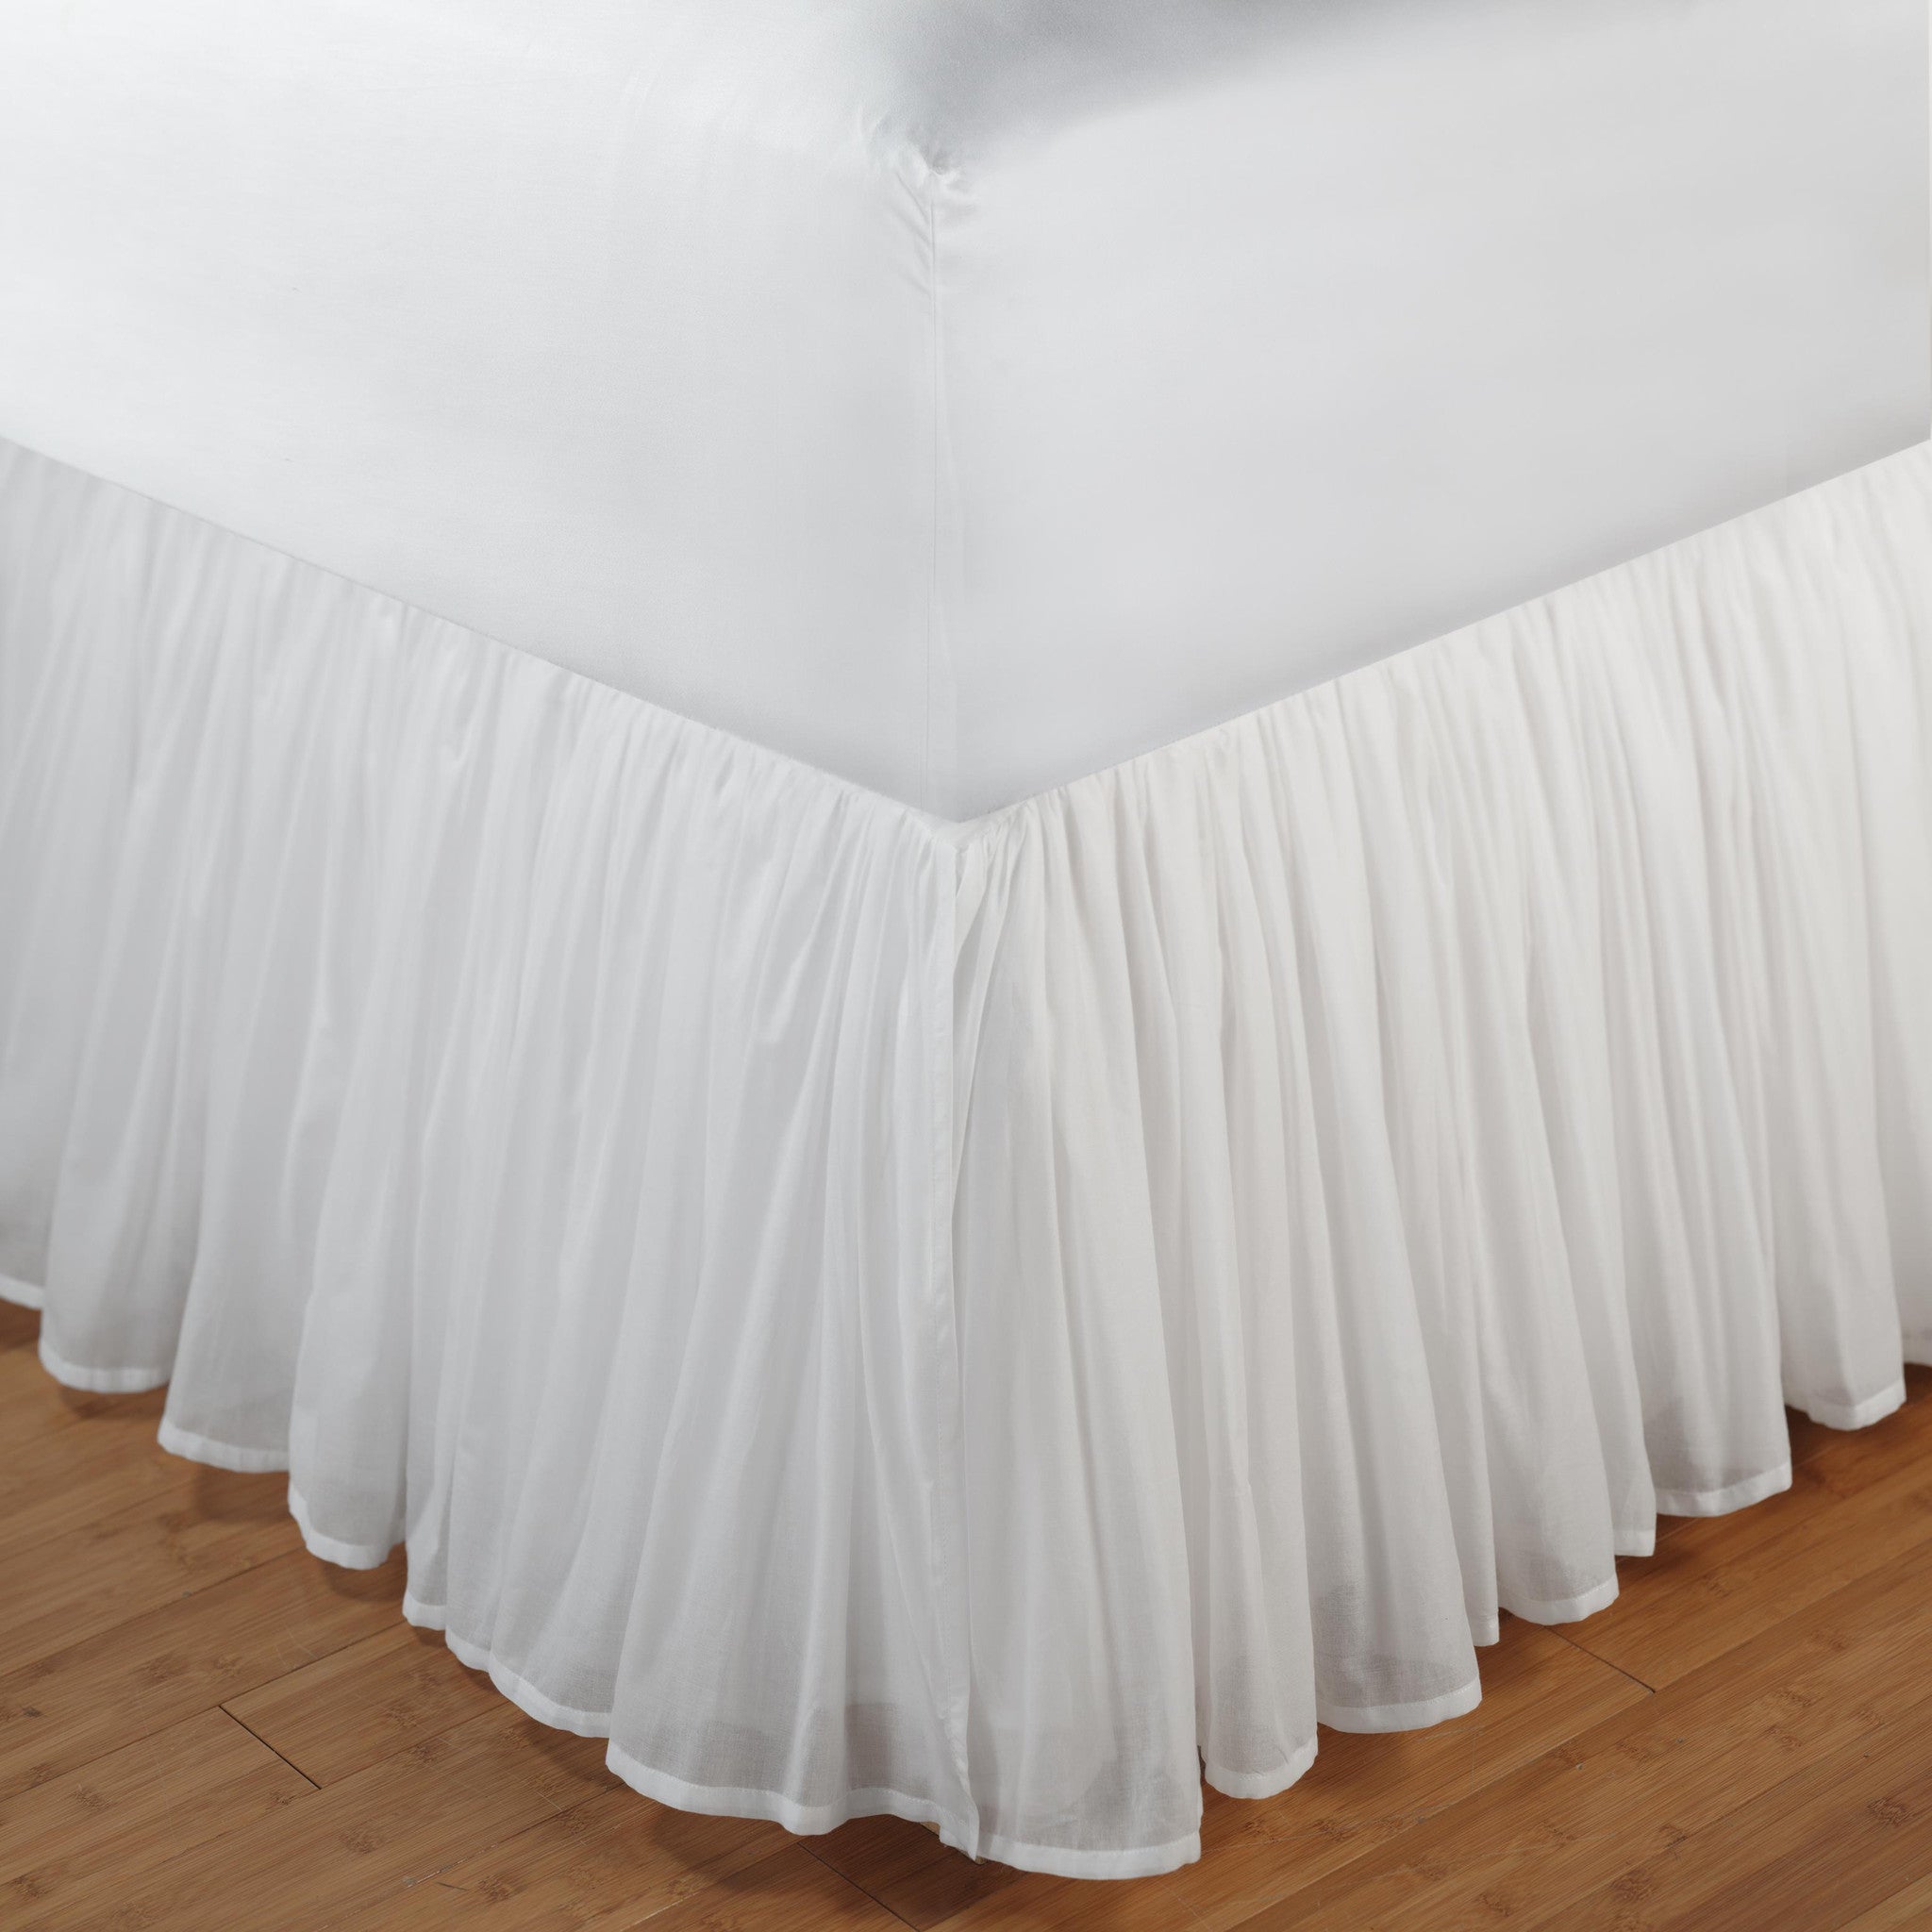 Greenland Home Fashion Cotton Voile Bed Skirt - White